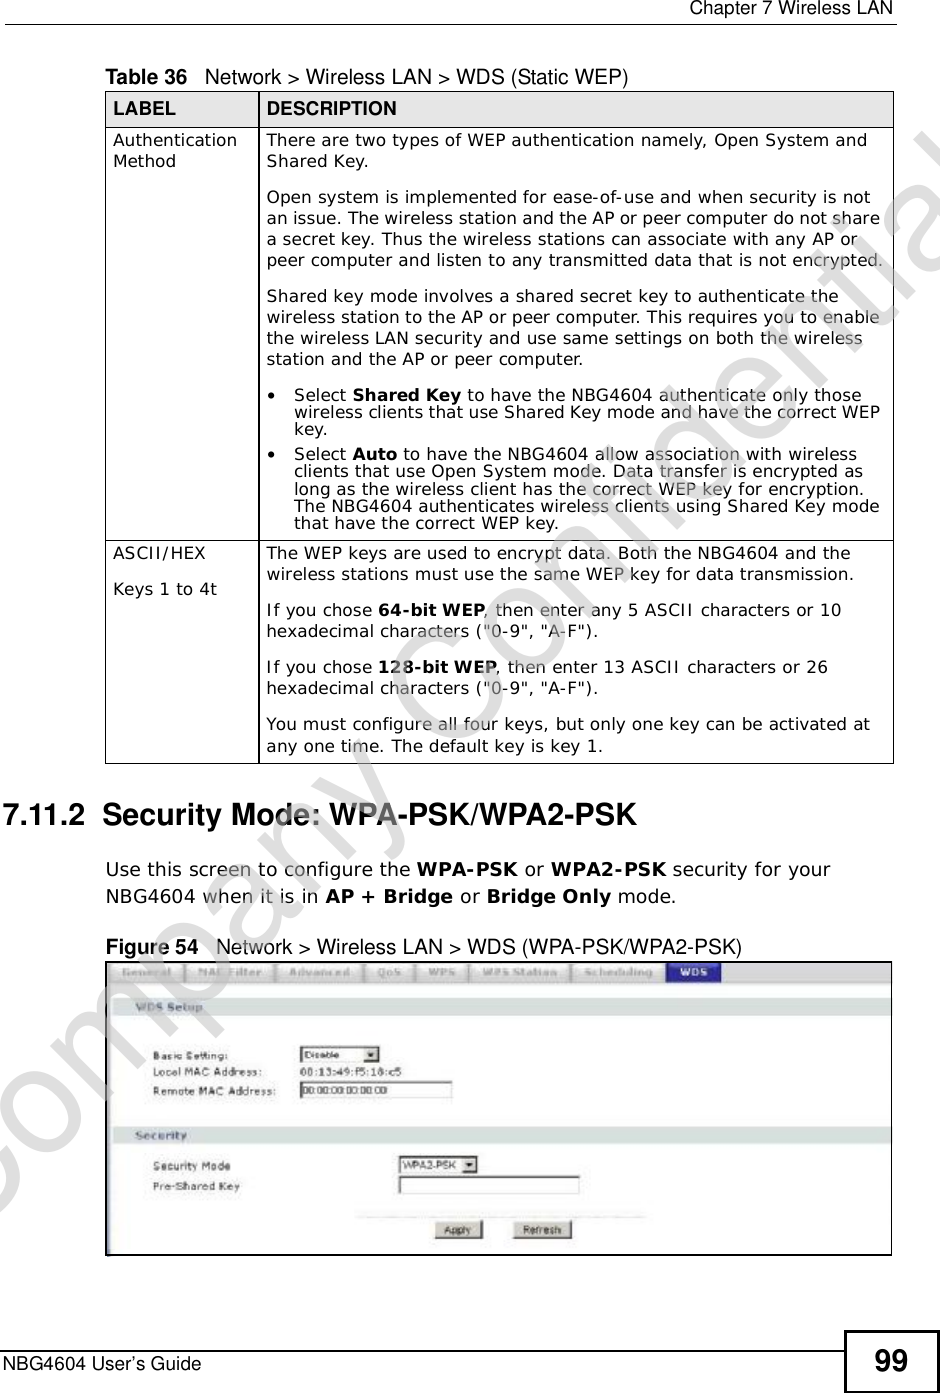  Chapter 7Wireless LANNBG4604 User’s Guide 997.11.2  Security Mode: WPA-PSK/WPA2-PSKUse this screen to configure the WPA-PSK or WPA2-PSK security for your NBG4604 when it is in AP + Bridge or Bridge Only mode.Figure 54   Network &gt; Wireless LAN &gt; WDS (WPA-PSK/WPA2-PSK)Authentication Method There are two types of WEP authentication namely, Open System and Shared Key. Open system is implemented for ease-of-use and when security is not an issue. The wireless station and the AP or peer computer do not share a secret key. Thus the wireless stations can associate with any AP or peer computer and listen to any transmitted data that is not encrypted.Shared key mode involves a shared secret key to authenticate the wireless station to the AP or peer computer. This requires you to enable the wireless LAN security and use same settings on both the wireless station and the AP or peer computer.•Select Shared Key to have the NBG4604 authenticate only those wireless clients that use Shared Key mode and have the correct WEP key. •Select Auto to have the NBG4604 allow association with wireless clients that use Open System mode. Data transfer is encrypted as long as the wireless client has the correct WEP key for encryption. The NBG4604 authenticates wireless clients using Shared Key mode that have the correct WEP key.ASCII/HEXKeys 1 to 4tThe WEP keys are used to encrypt data. Both the NBG4604 and the wireless stations must use the same WEP key for data transmission.If you chose 64-bit WEP, then enter any 5 ASCII characters or 10 hexadecimal characters (&quot;0-9&quot;, &quot;A-F&quot;). If you chose 128-bit WEP, then enter 13 ASCII characters or 26 hexadecimal characters (&quot;0-9&quot;, &quot;A-F&quot;).  You must configure all four keys, but only one key can be activated at any one time. The default key is key 1. Table 36   Network &gt; Wireless LAN &gt; WDS (Static WEP)LABEL DESCRIPTIONCompany Confidential